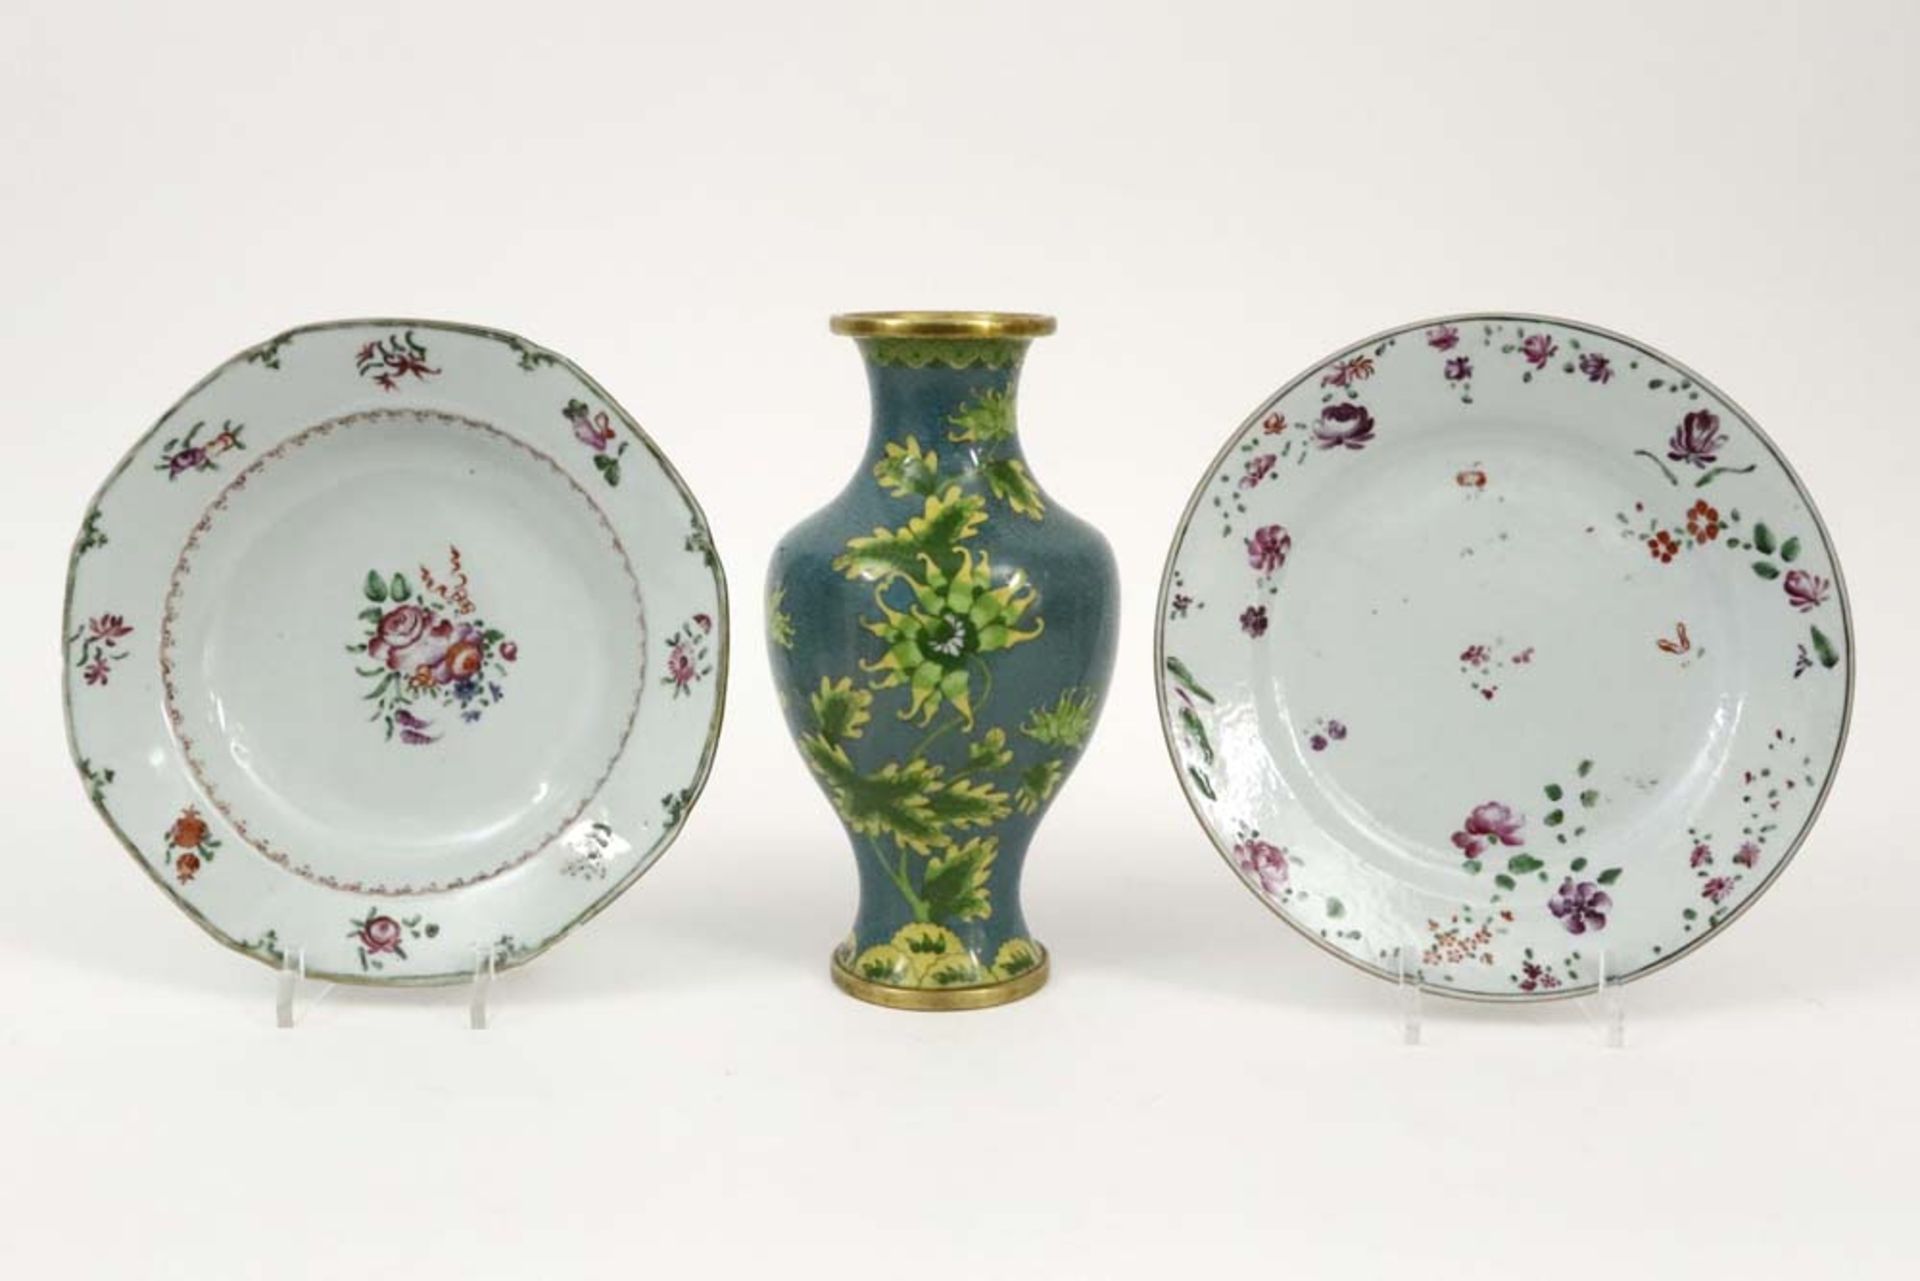 Chinese cloisonné vase and two 18th Cent. Chinese plates in porcelain || Lot van een Chinese vaas in